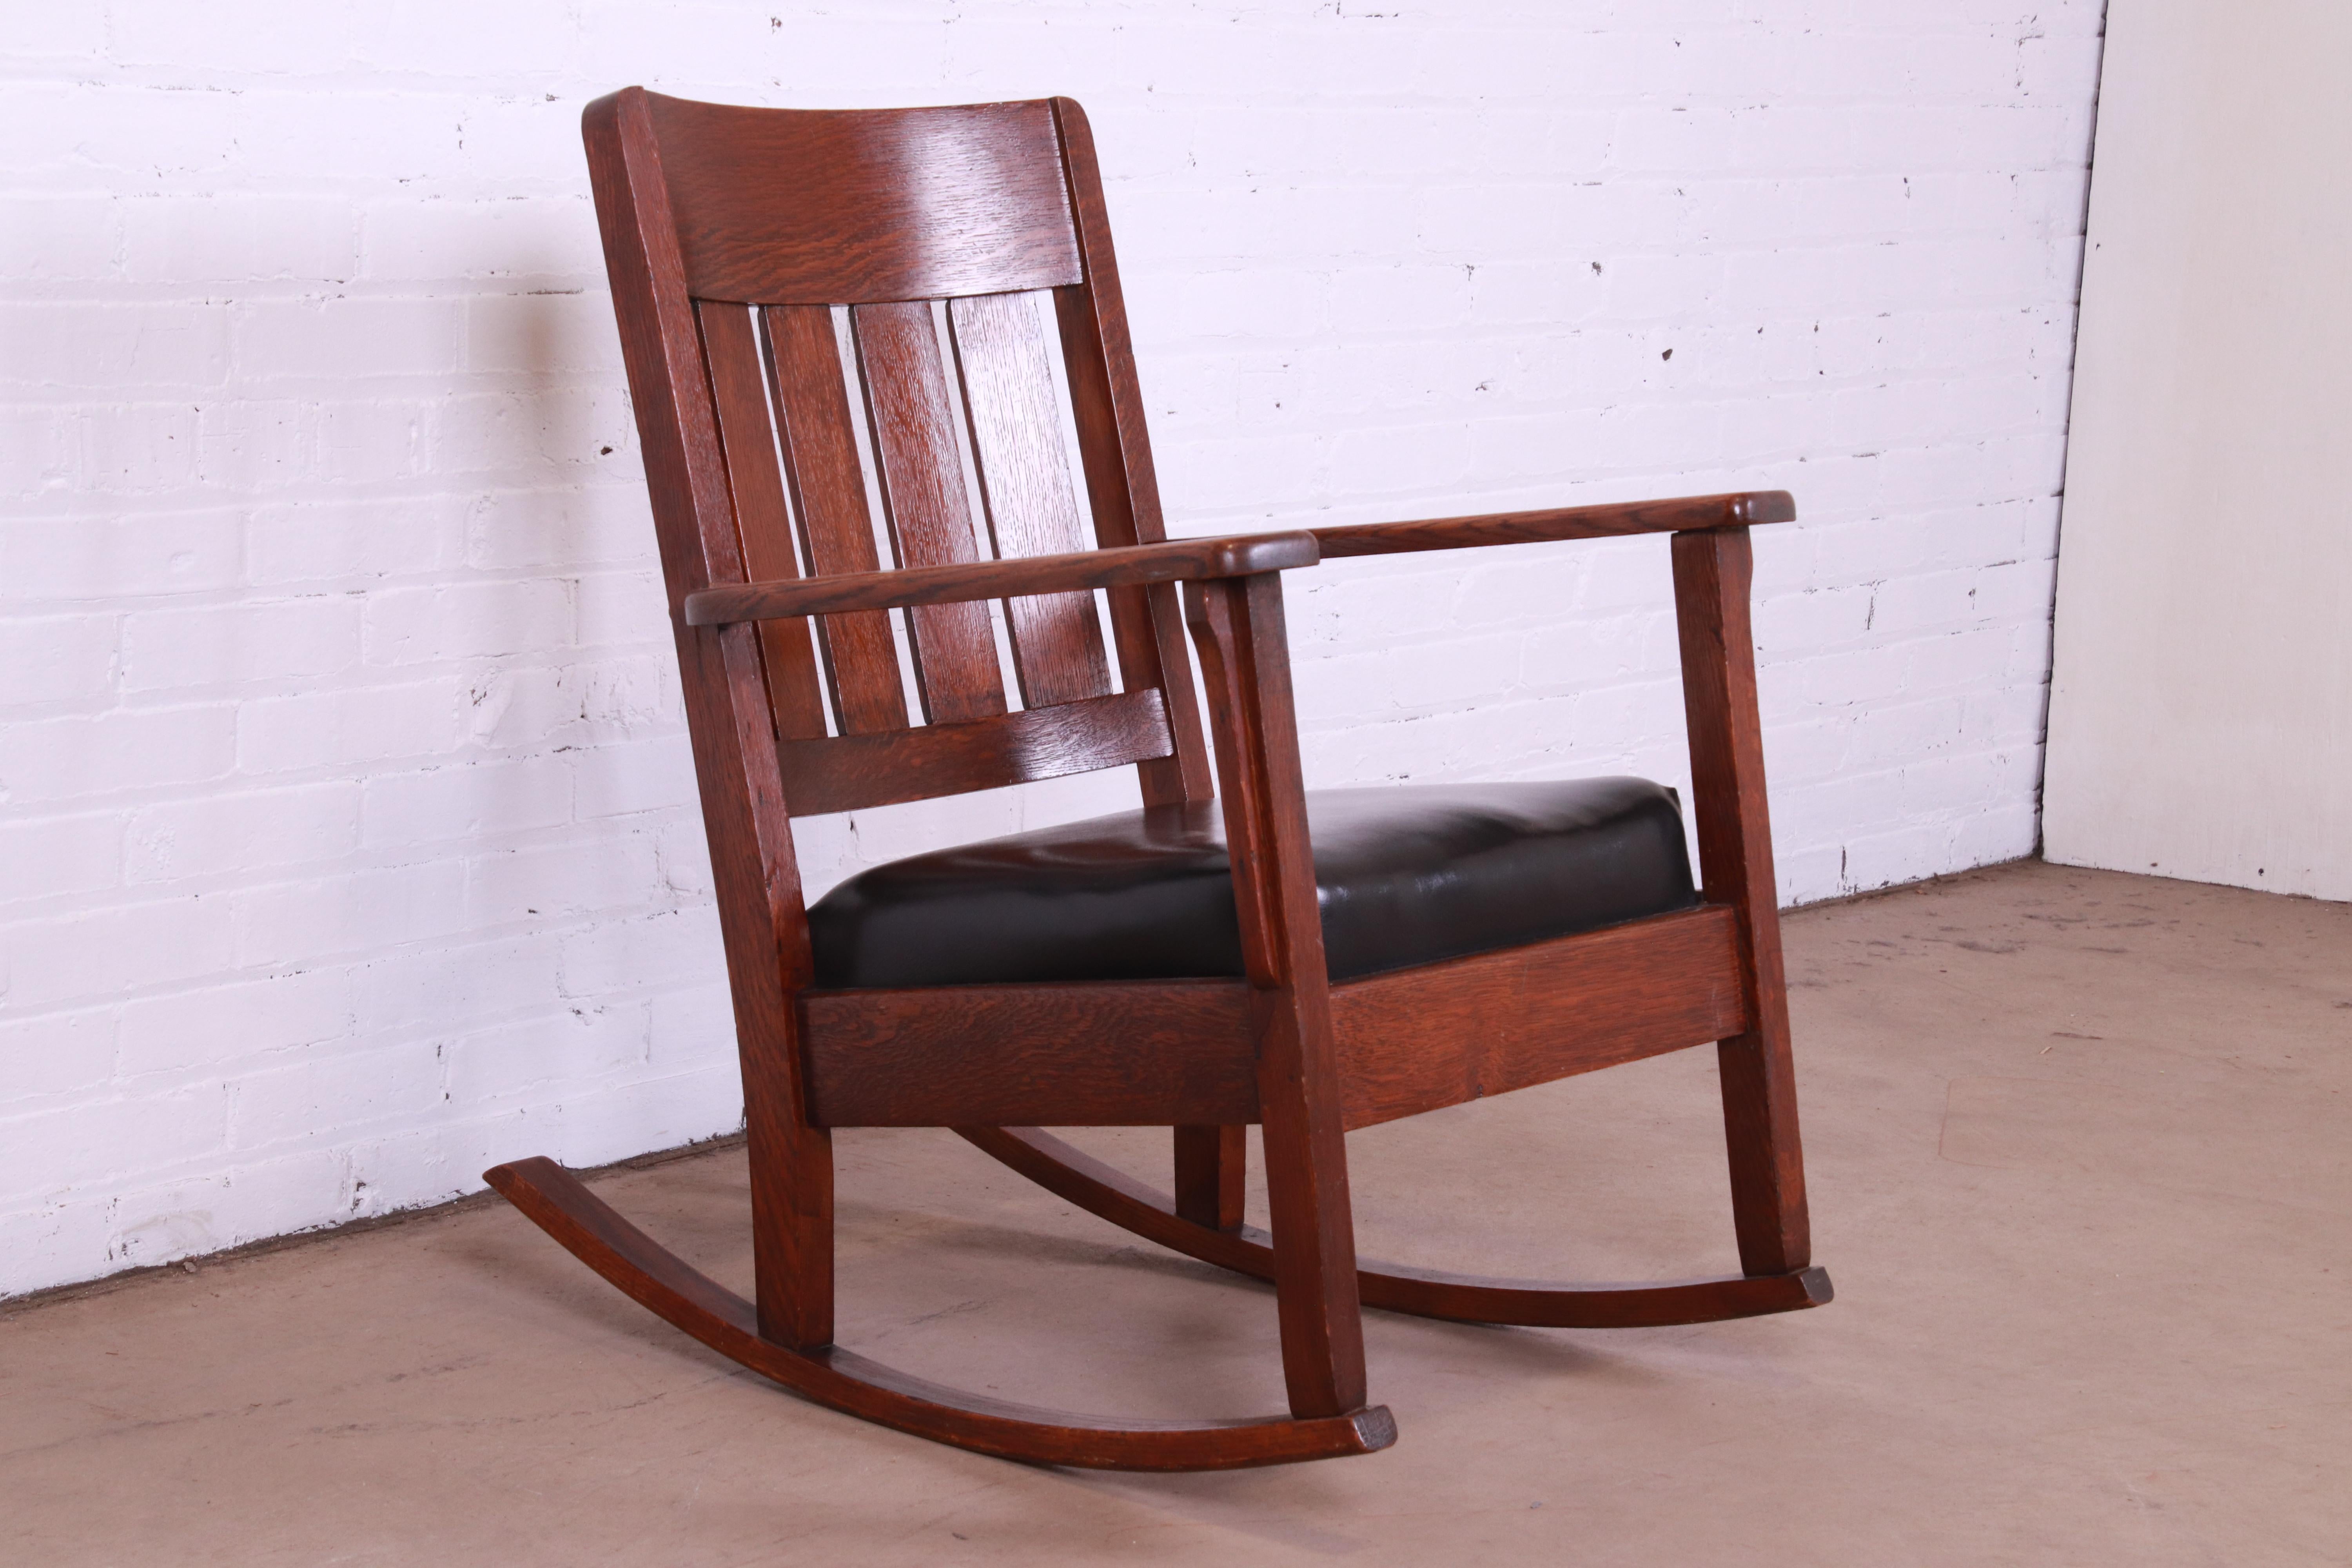 American Stickley Style Arts & Crafts Oak and Leather Rocking Chair, Circa 1900